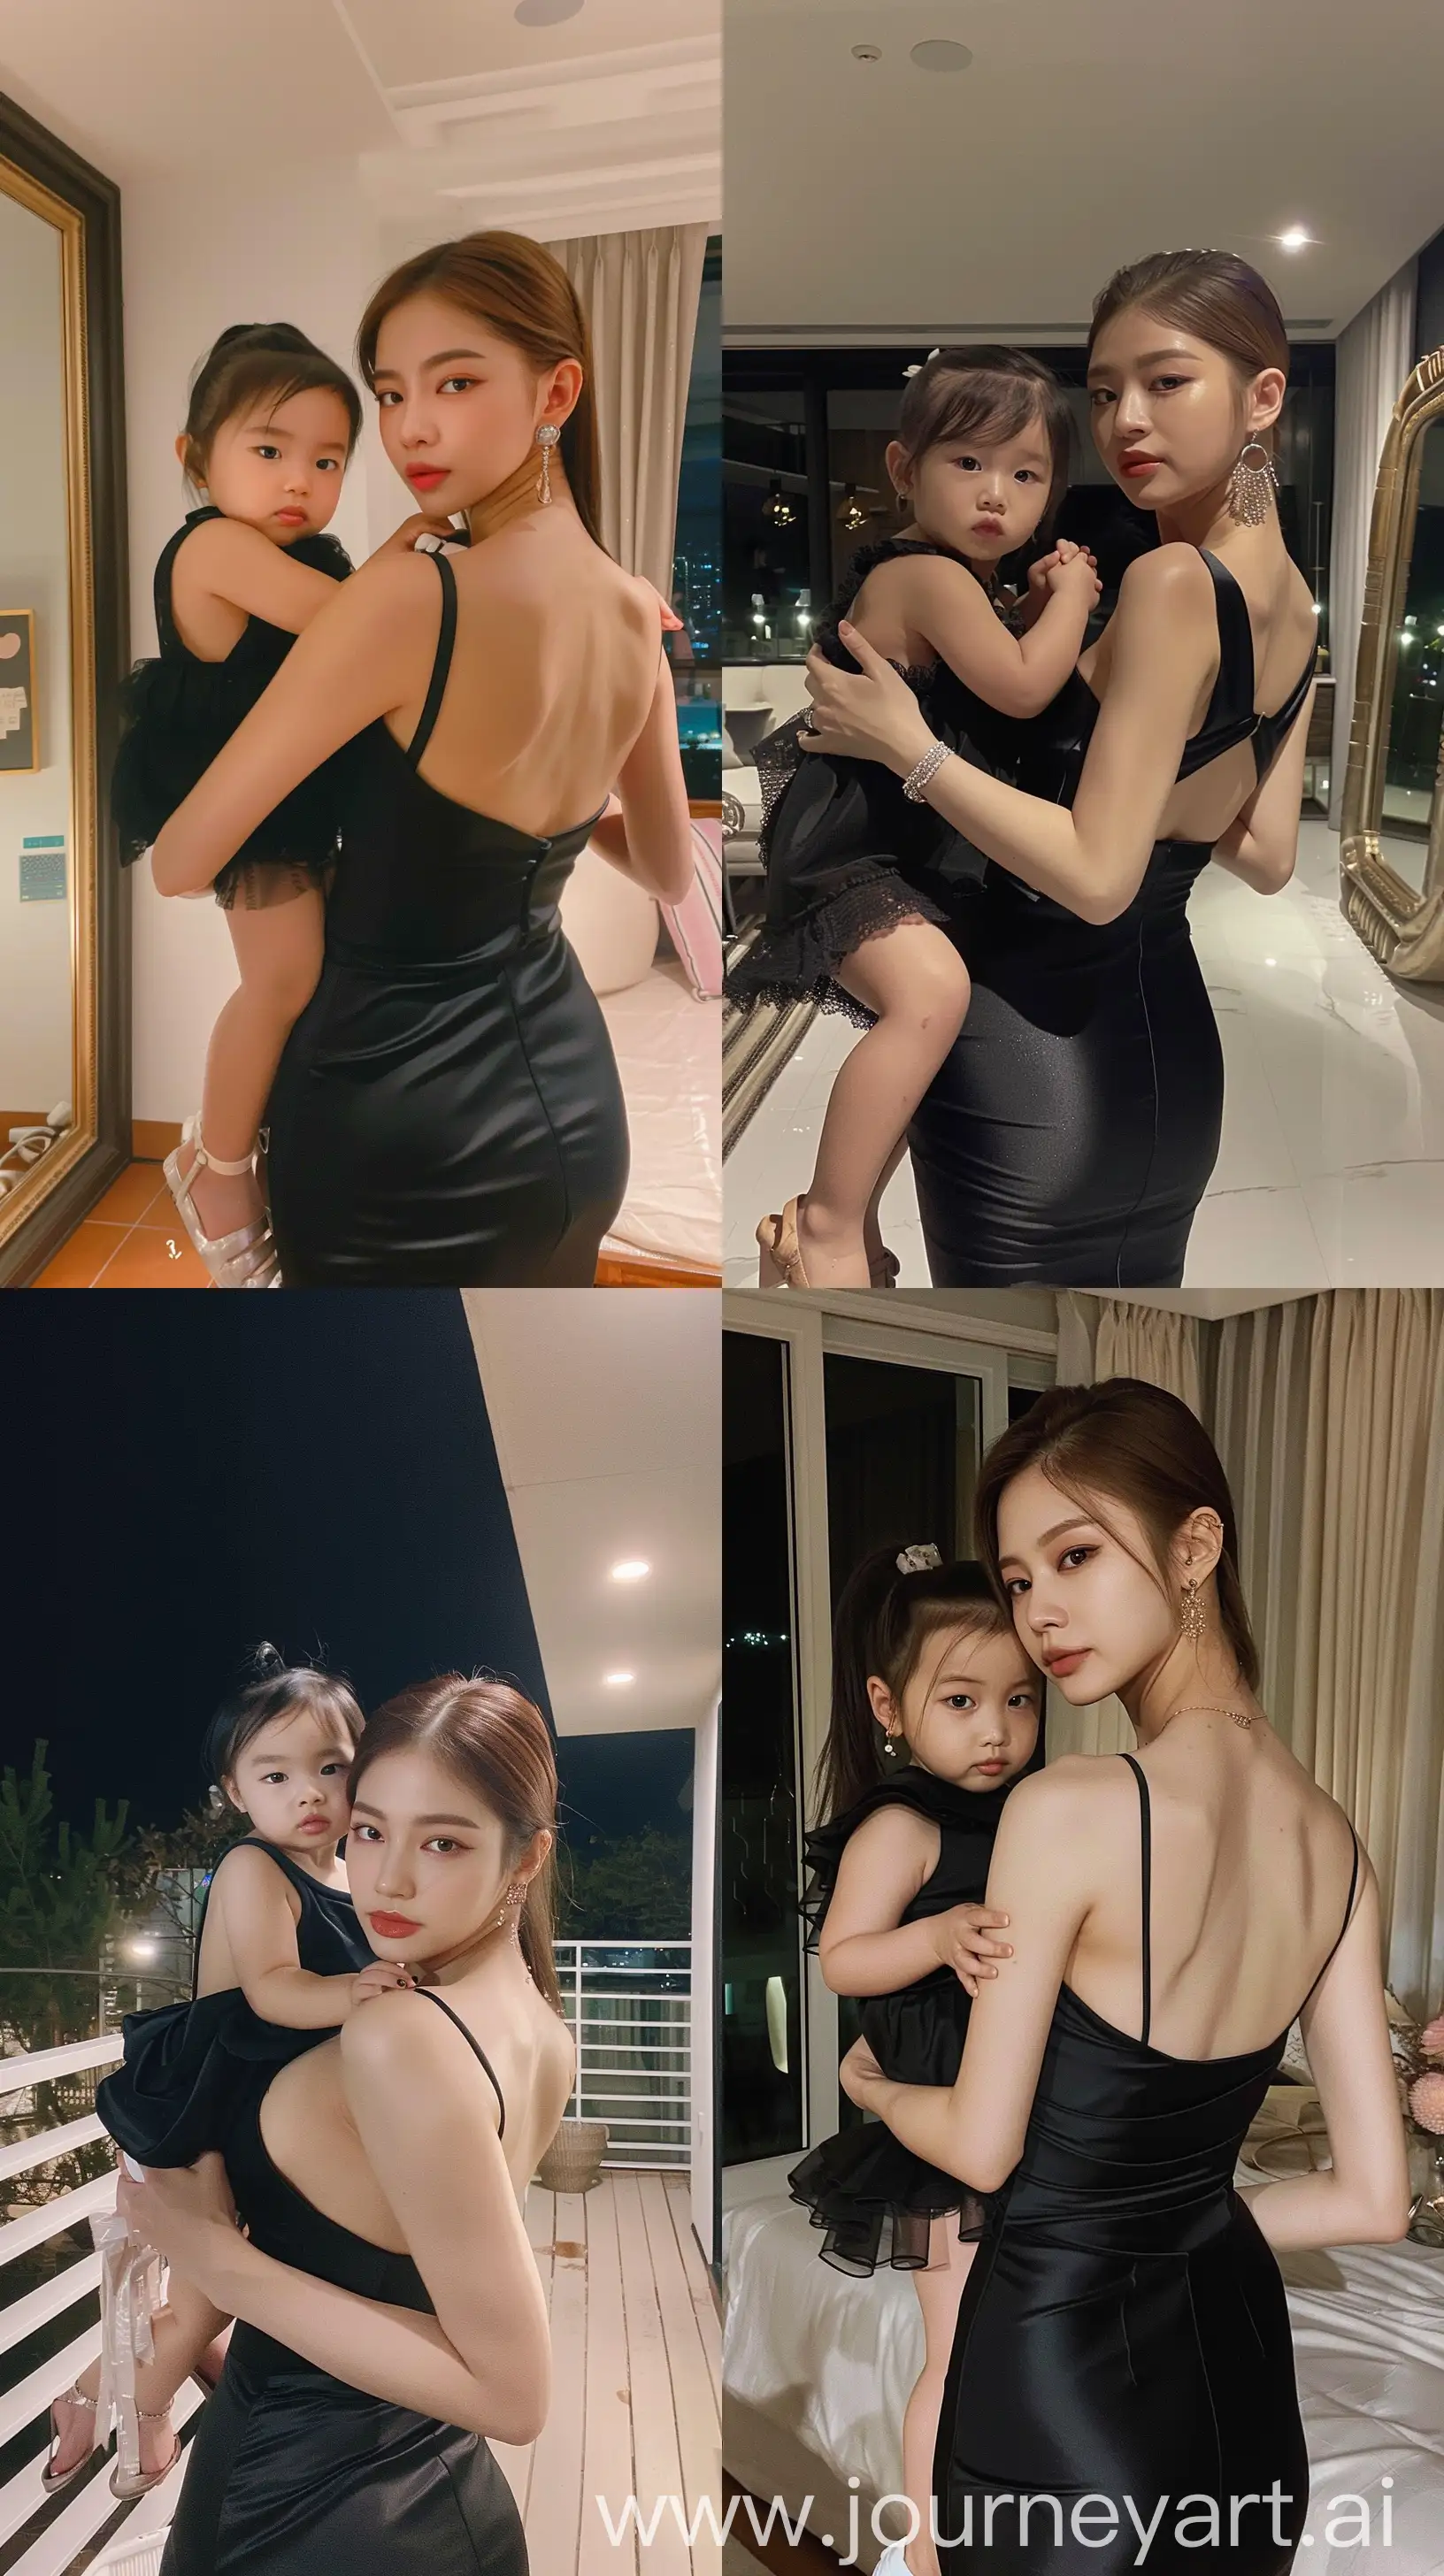 blackpink's jennie,holding 2 years old girl, facial feature look a like blackpink's jennie, aestethic selfie, night times, aestethic make up, wearing black elegant dress, back body, hotly young mom --ar 9:16 